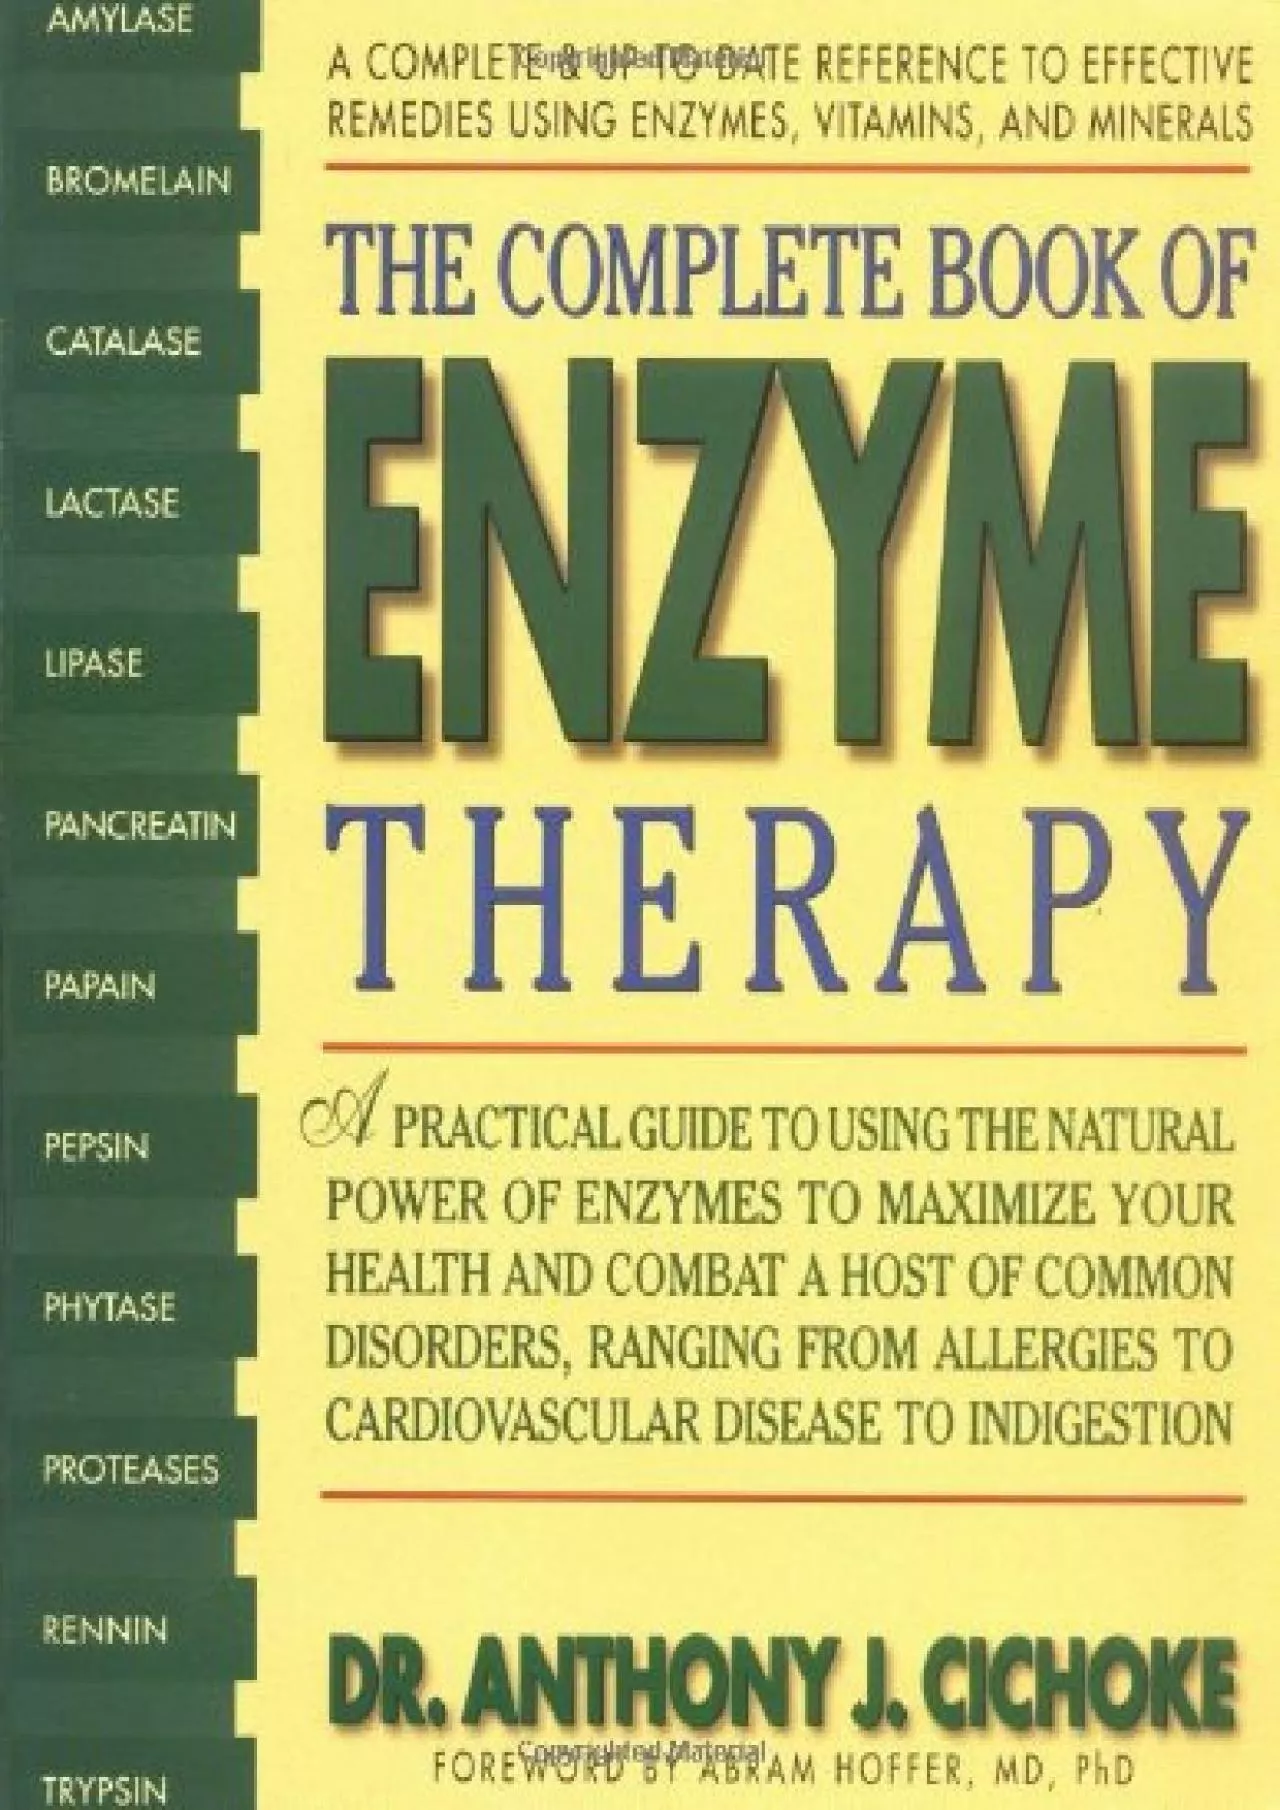 (DOWNLOAD)-The Complete Book of Enzyme Therapy: A Complete and Up-to-Date Reference to